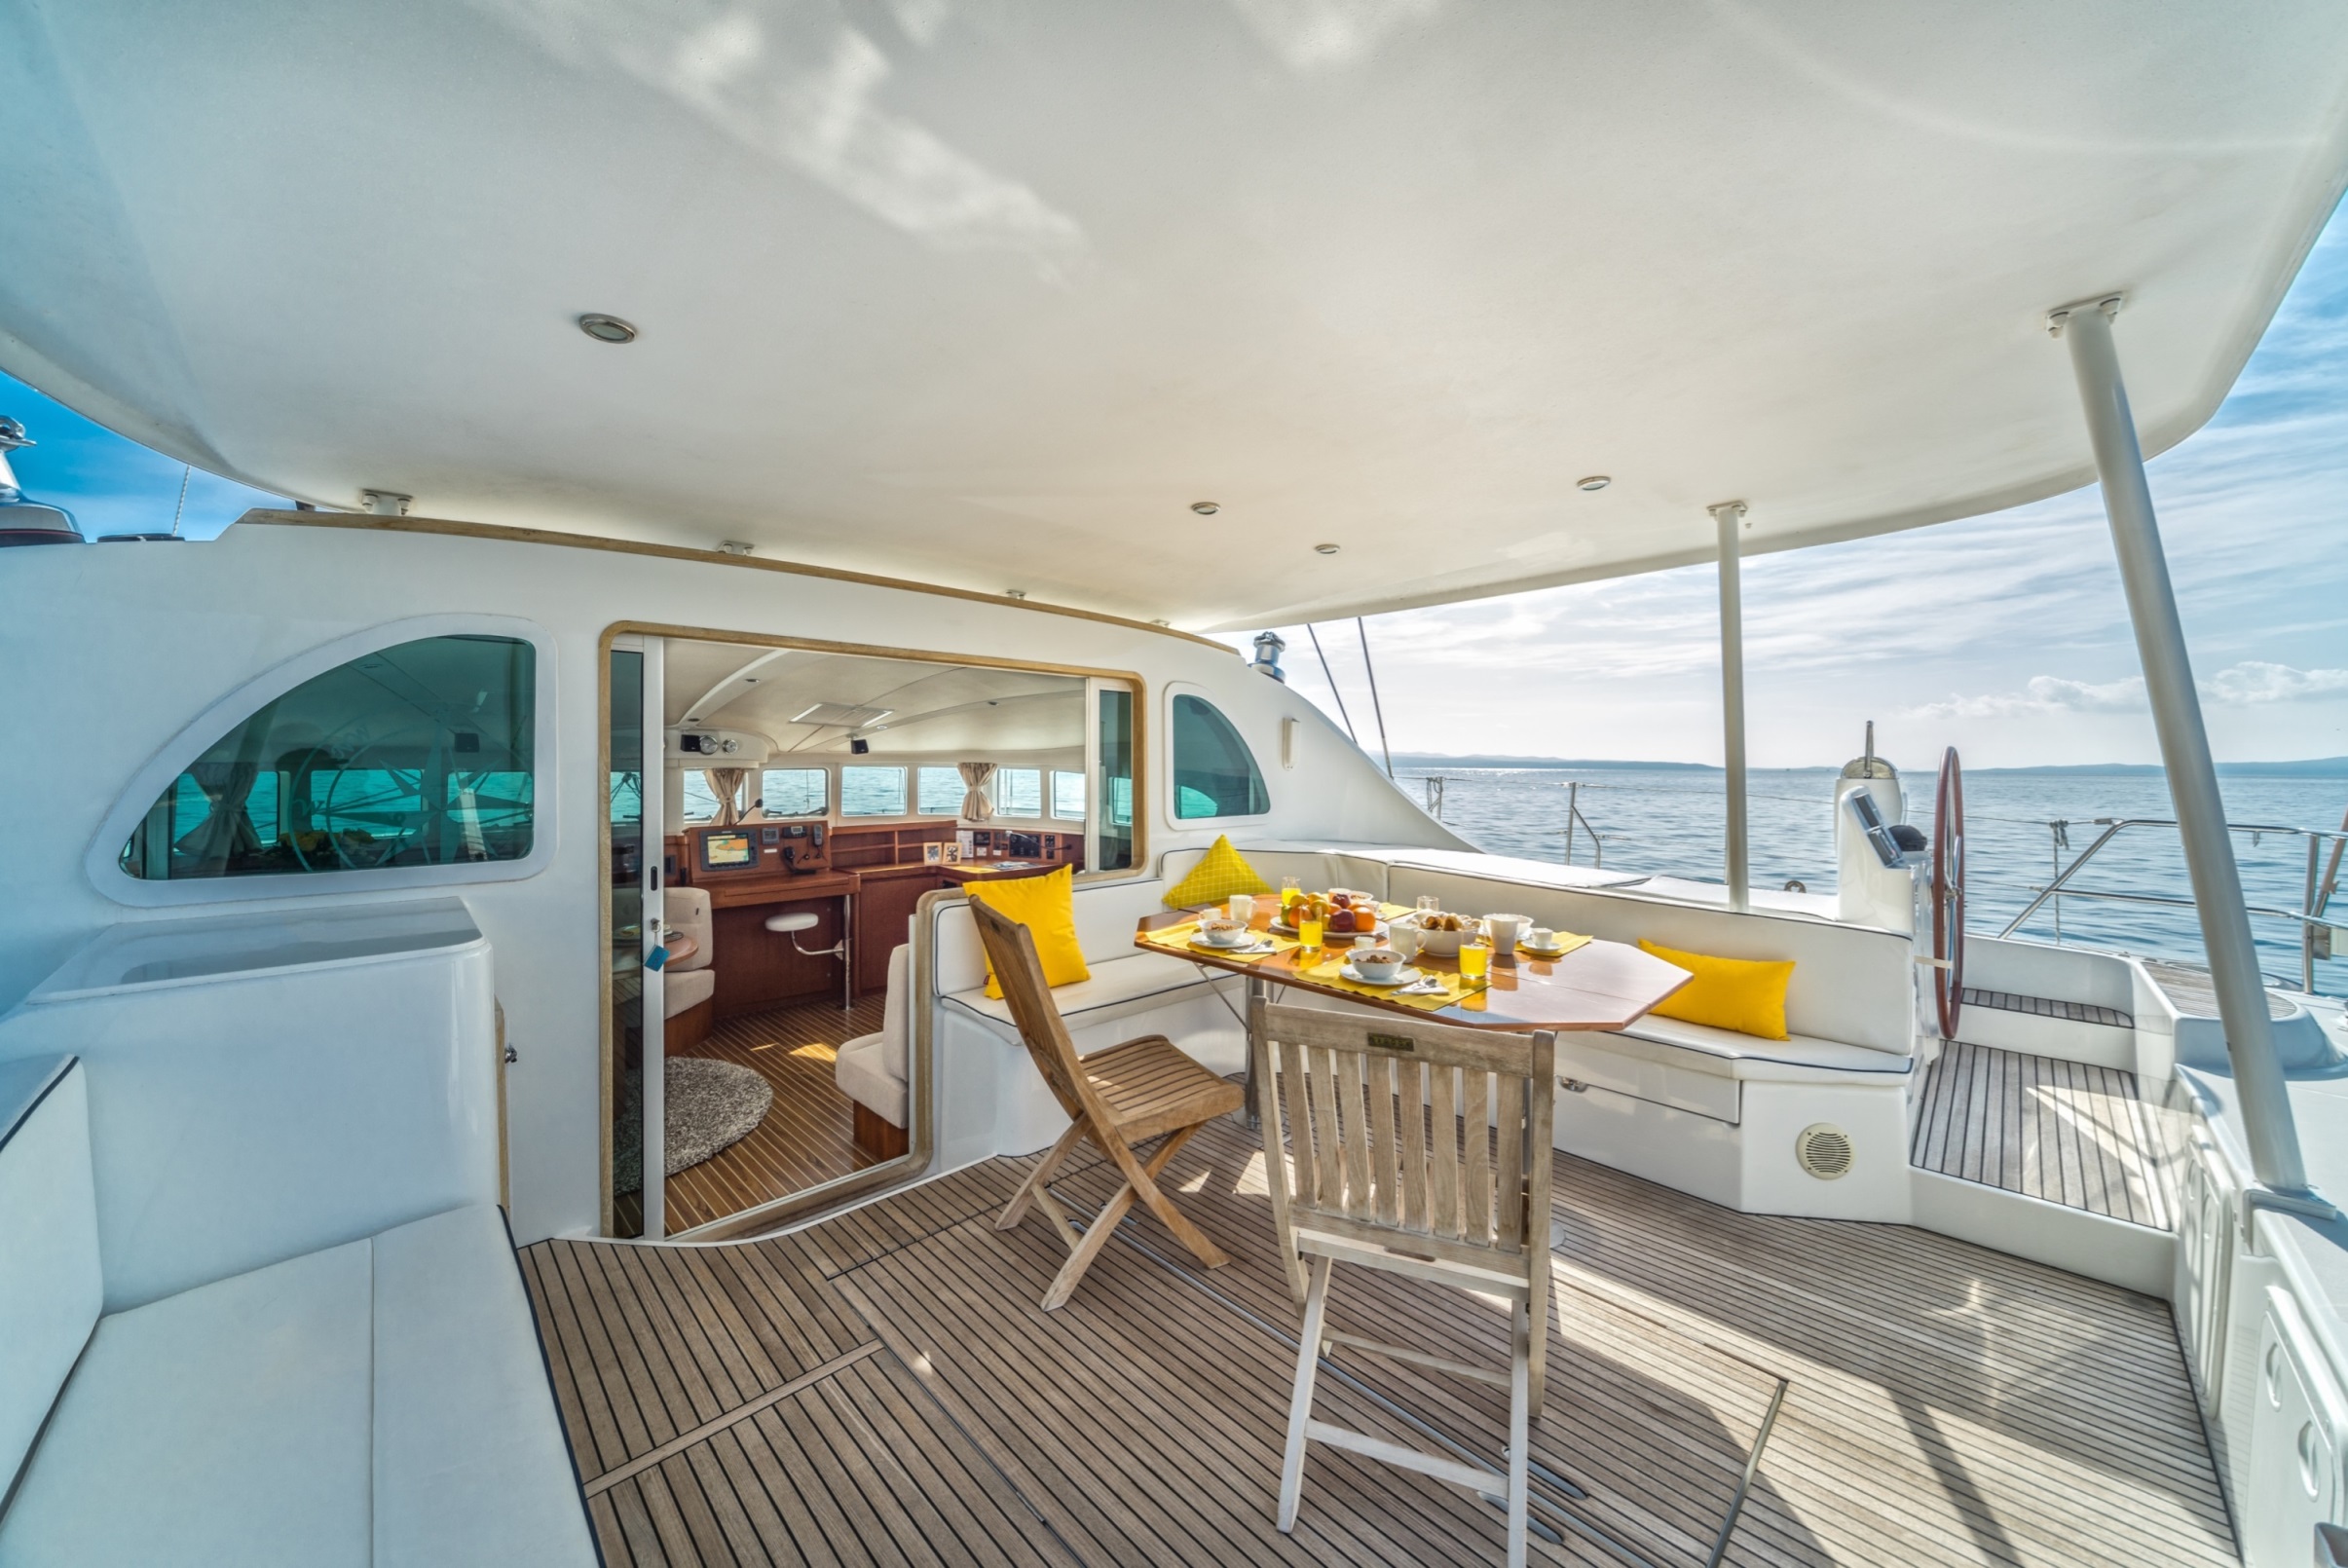 Aft deck with alfresco dining